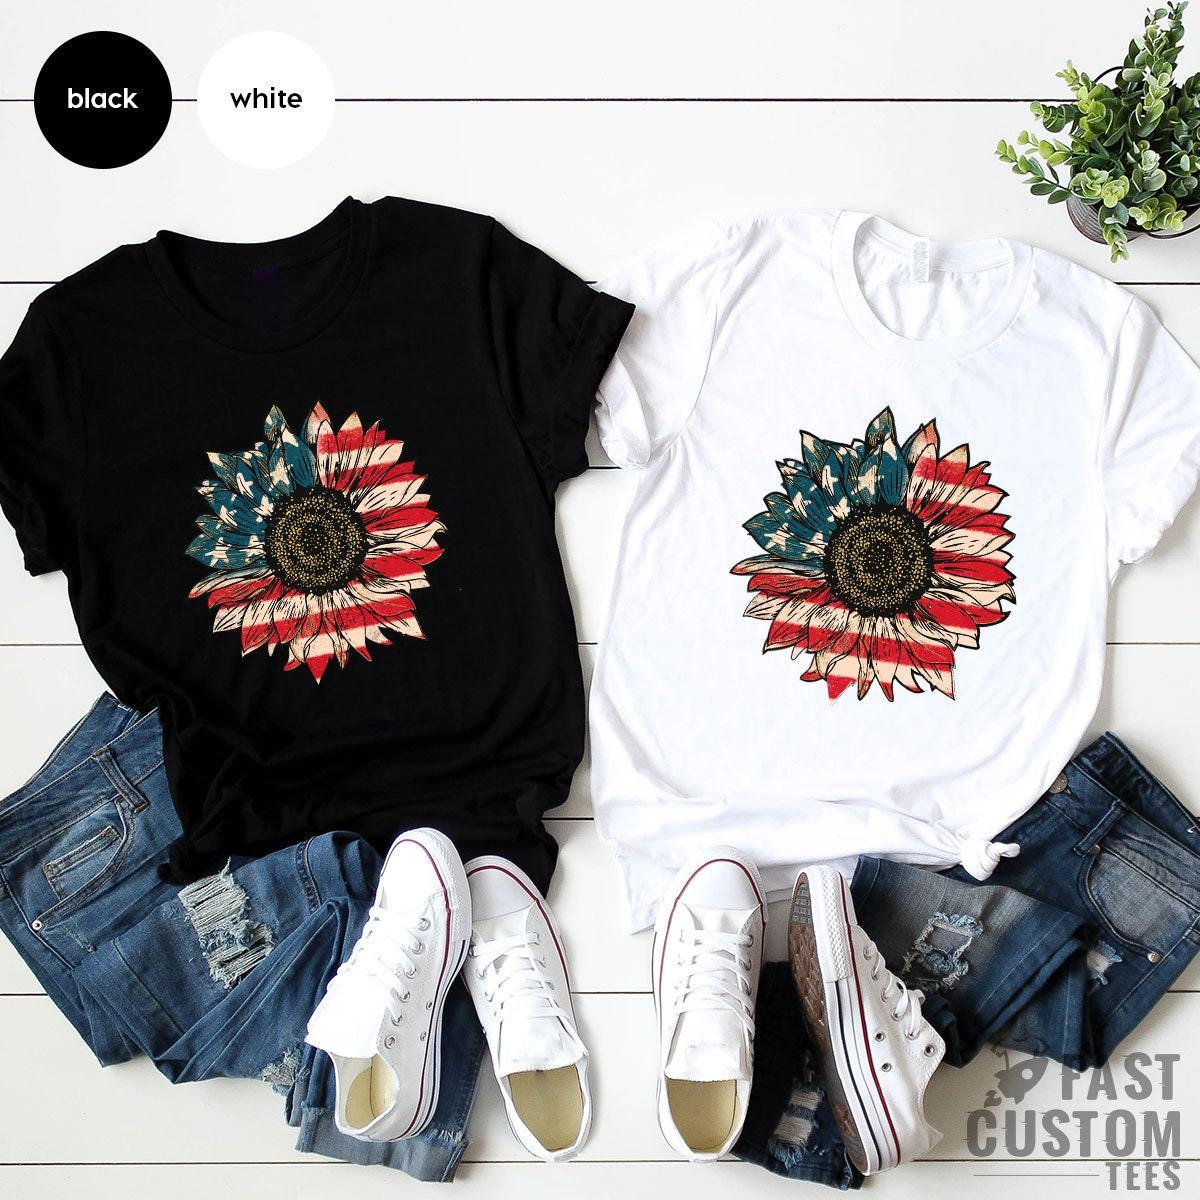 America Sunflower Shirt, USA Flag Flower T Shirt, Gift For American, 4th Of July Flag Graphic T-Shirt, Freedom TShirt, Independence Shirt - Fastdeliverytees.com